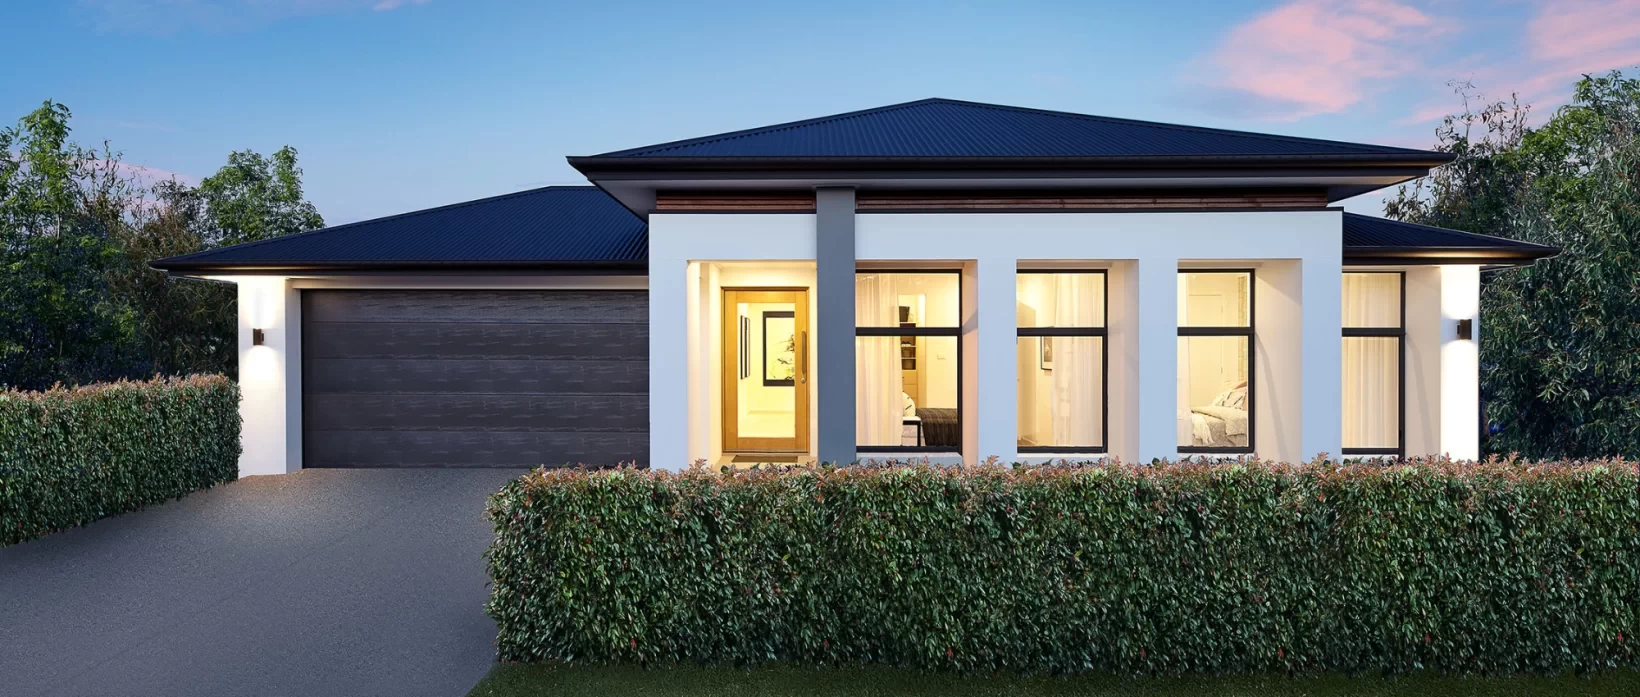 House and Land Packages Clarendon Homes Sydney NSW